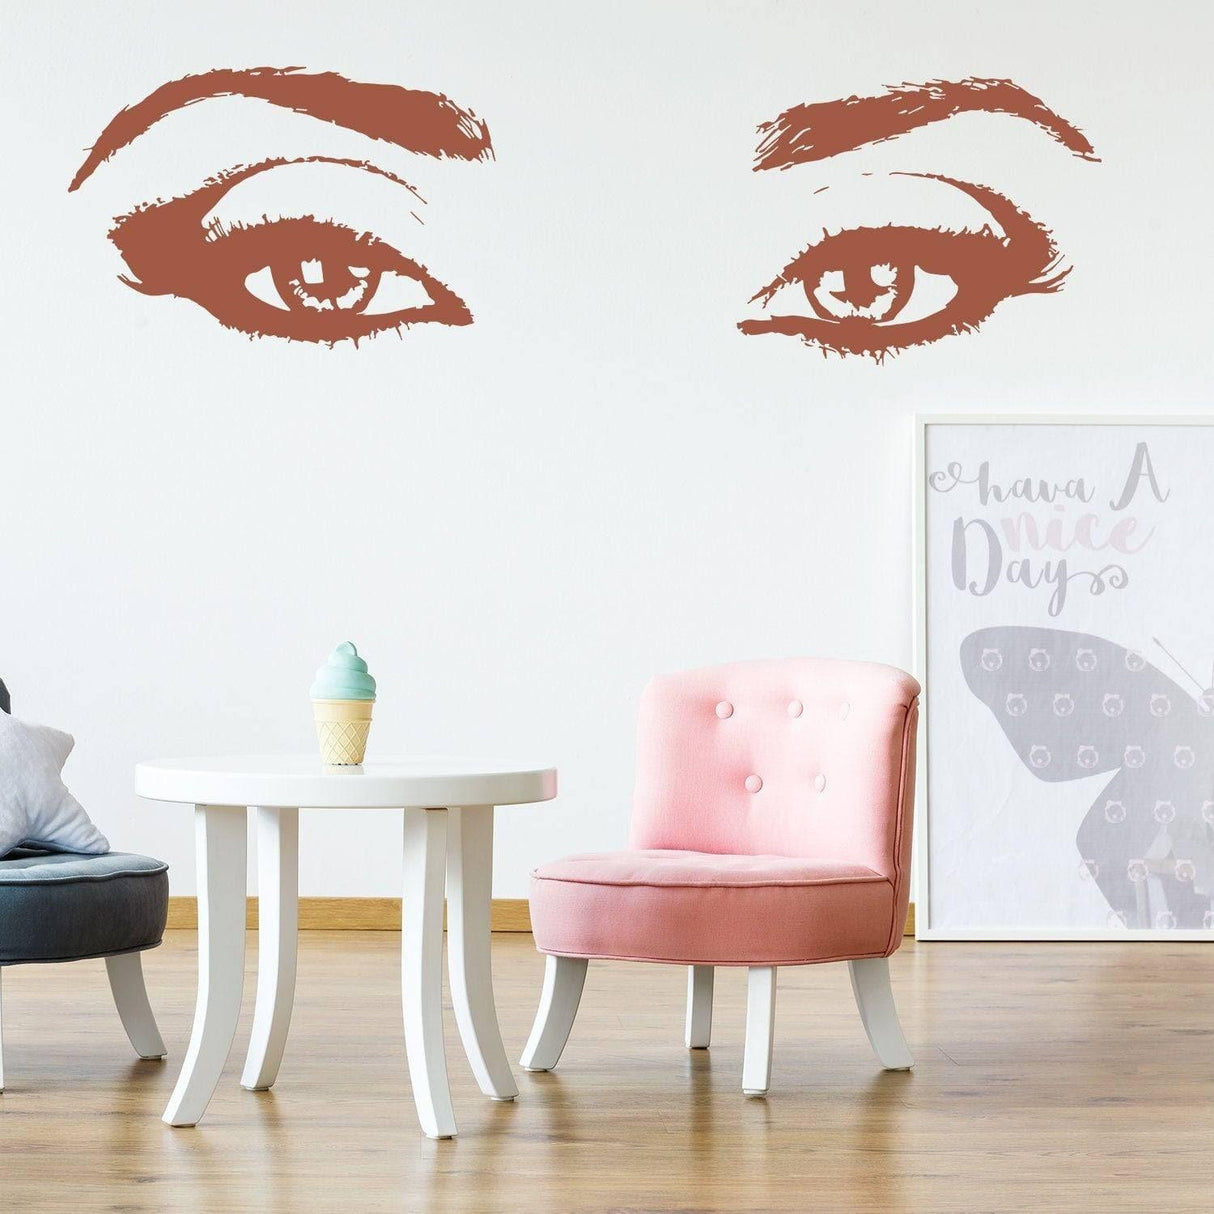 Fun The lash room Wall Decal Art Vinyl Stickers For Beauty Salon